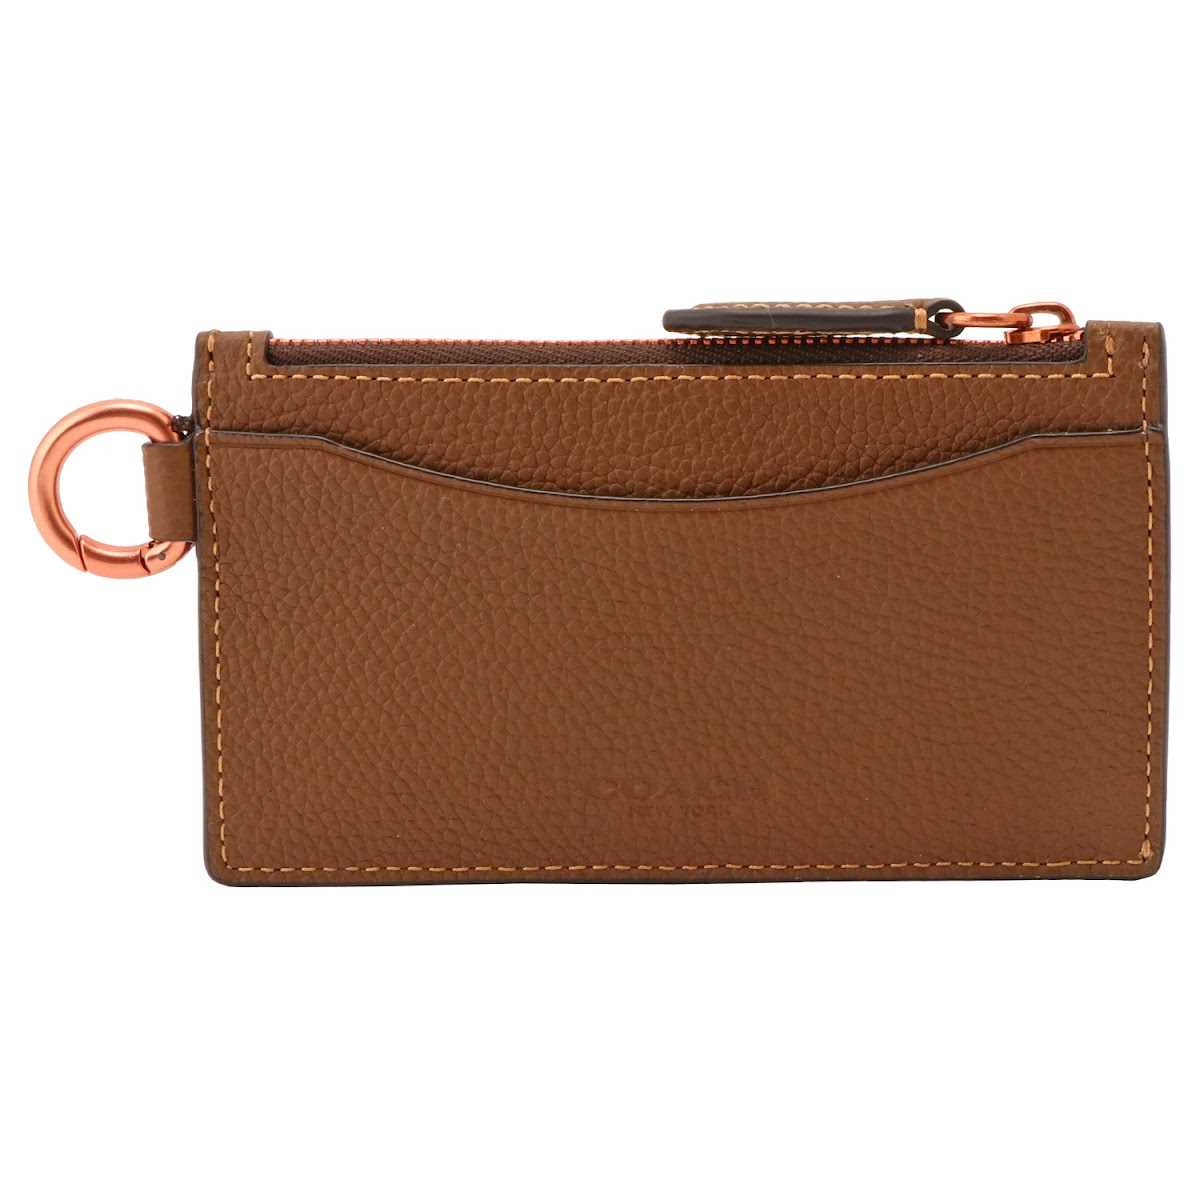 COACH コーチ C6696 CWH Dリング付 ジップ スリム カードケース コインケース ダークサドル メンズ ZIP CARD CASE WITH HINGED D-RING 【bwco01026m】